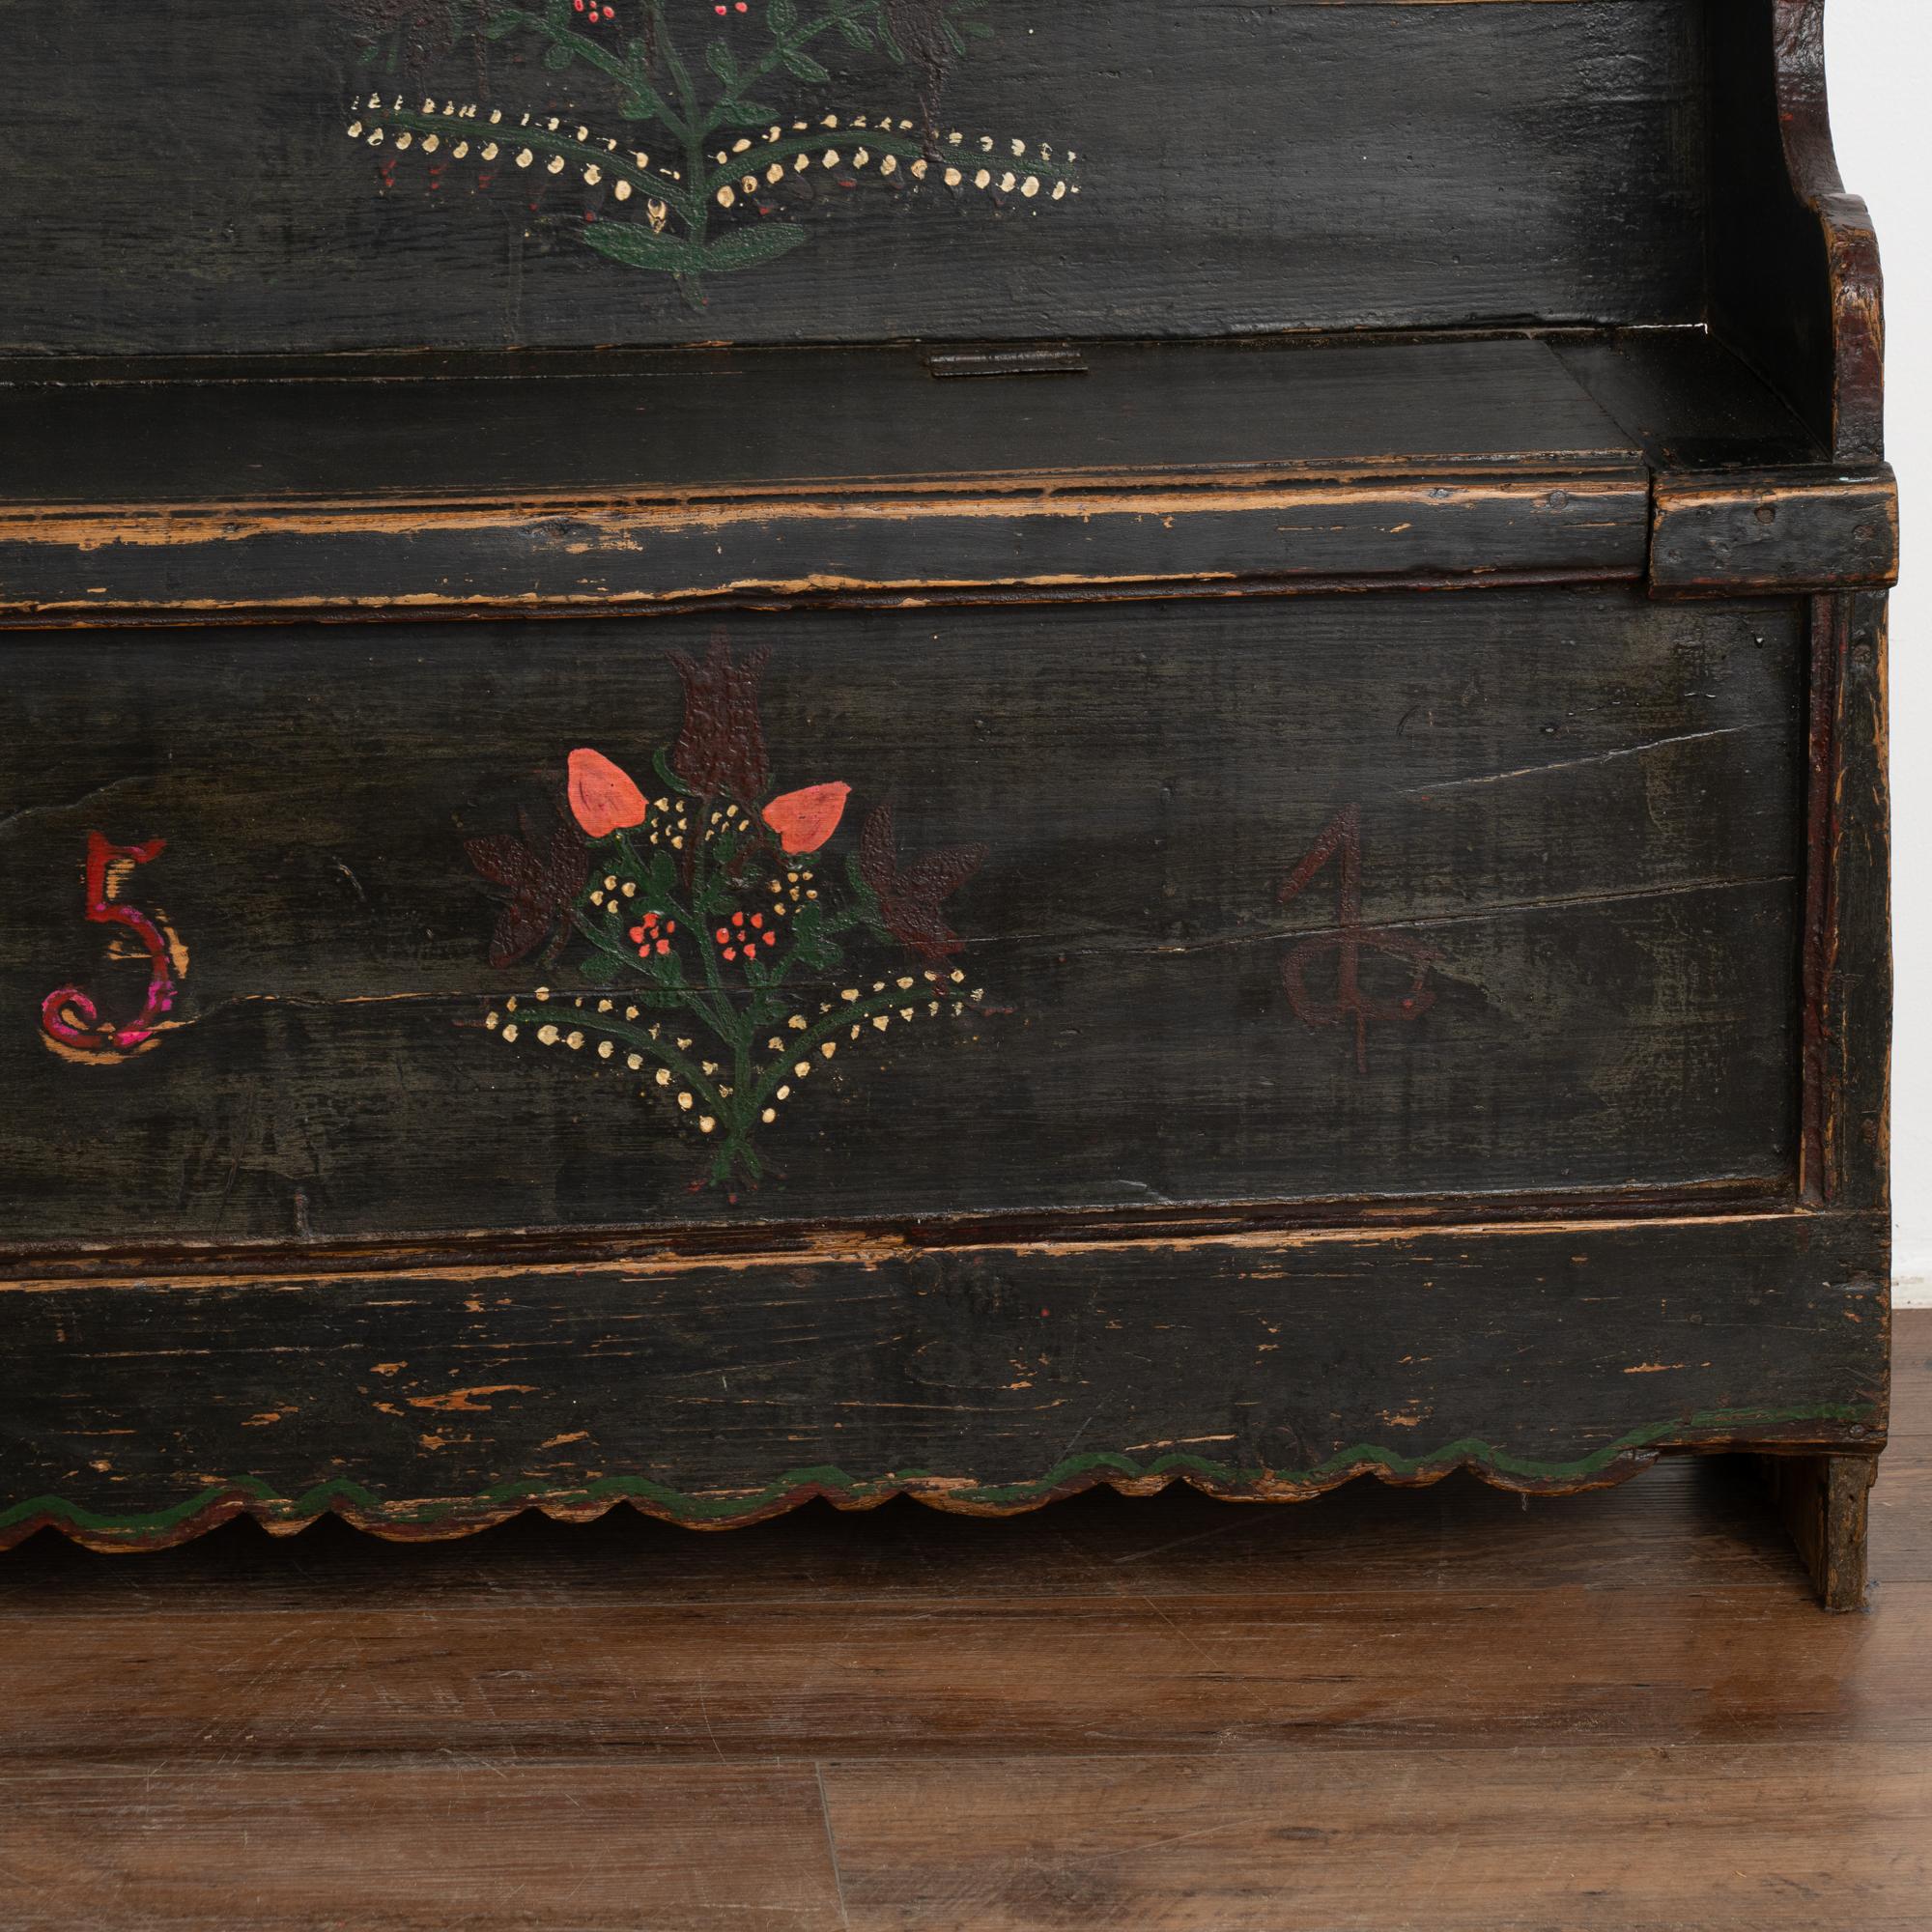 Original Black Painted Narrow Pine Bench With Storage, Hungary dated 1951 For Sale 2